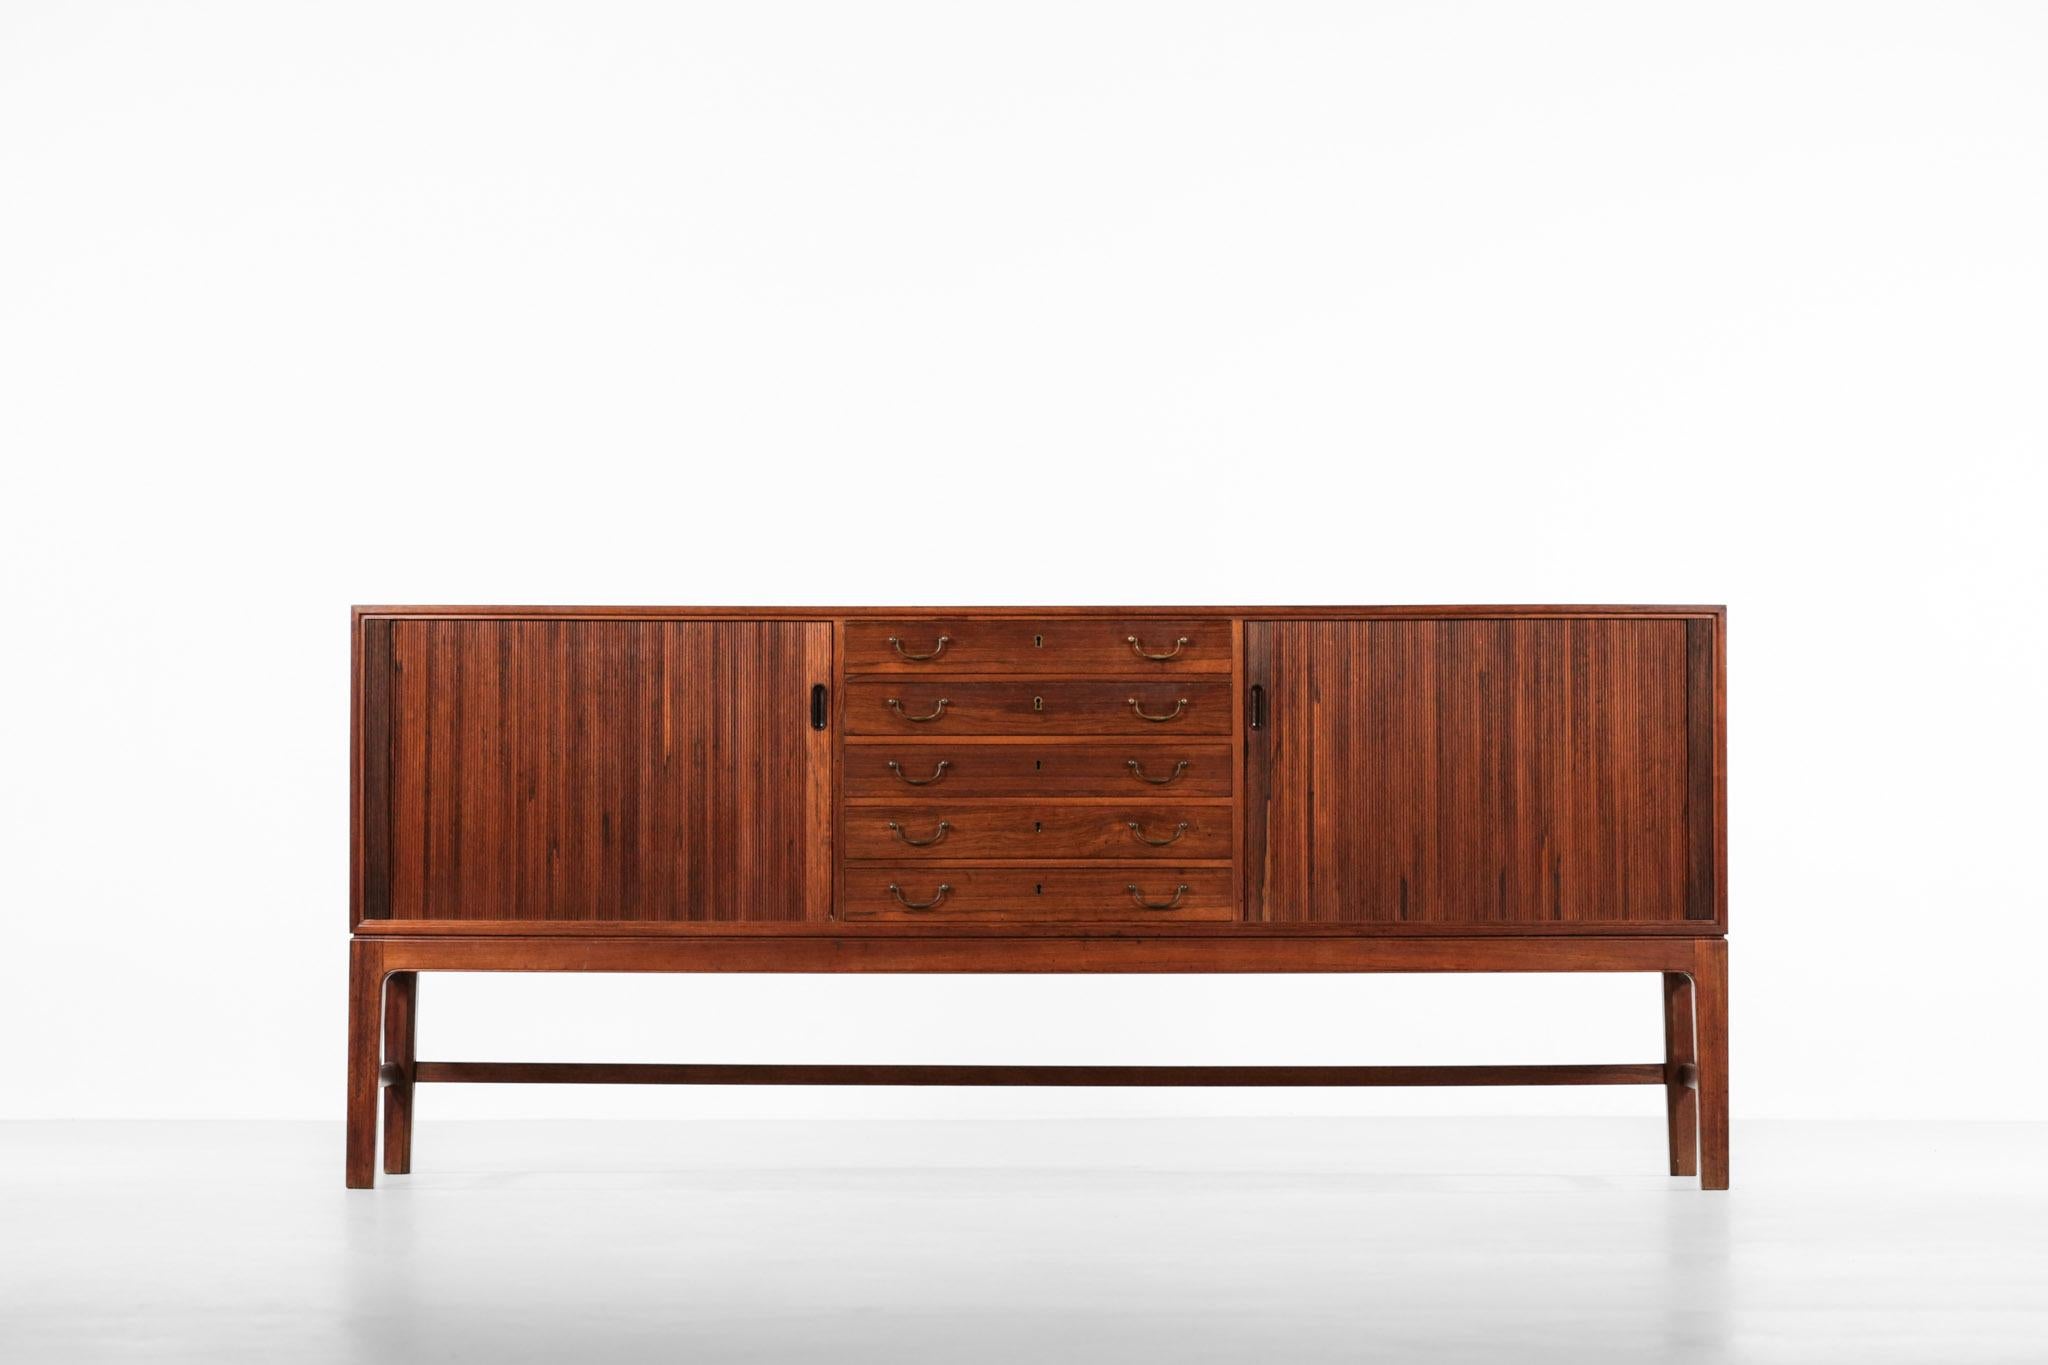 Rare sideboard designed by Ole Wanscher.
Structure in rosewood with brass knobs.
Composed of two sliding doors with 5 drawers.
High quality work.